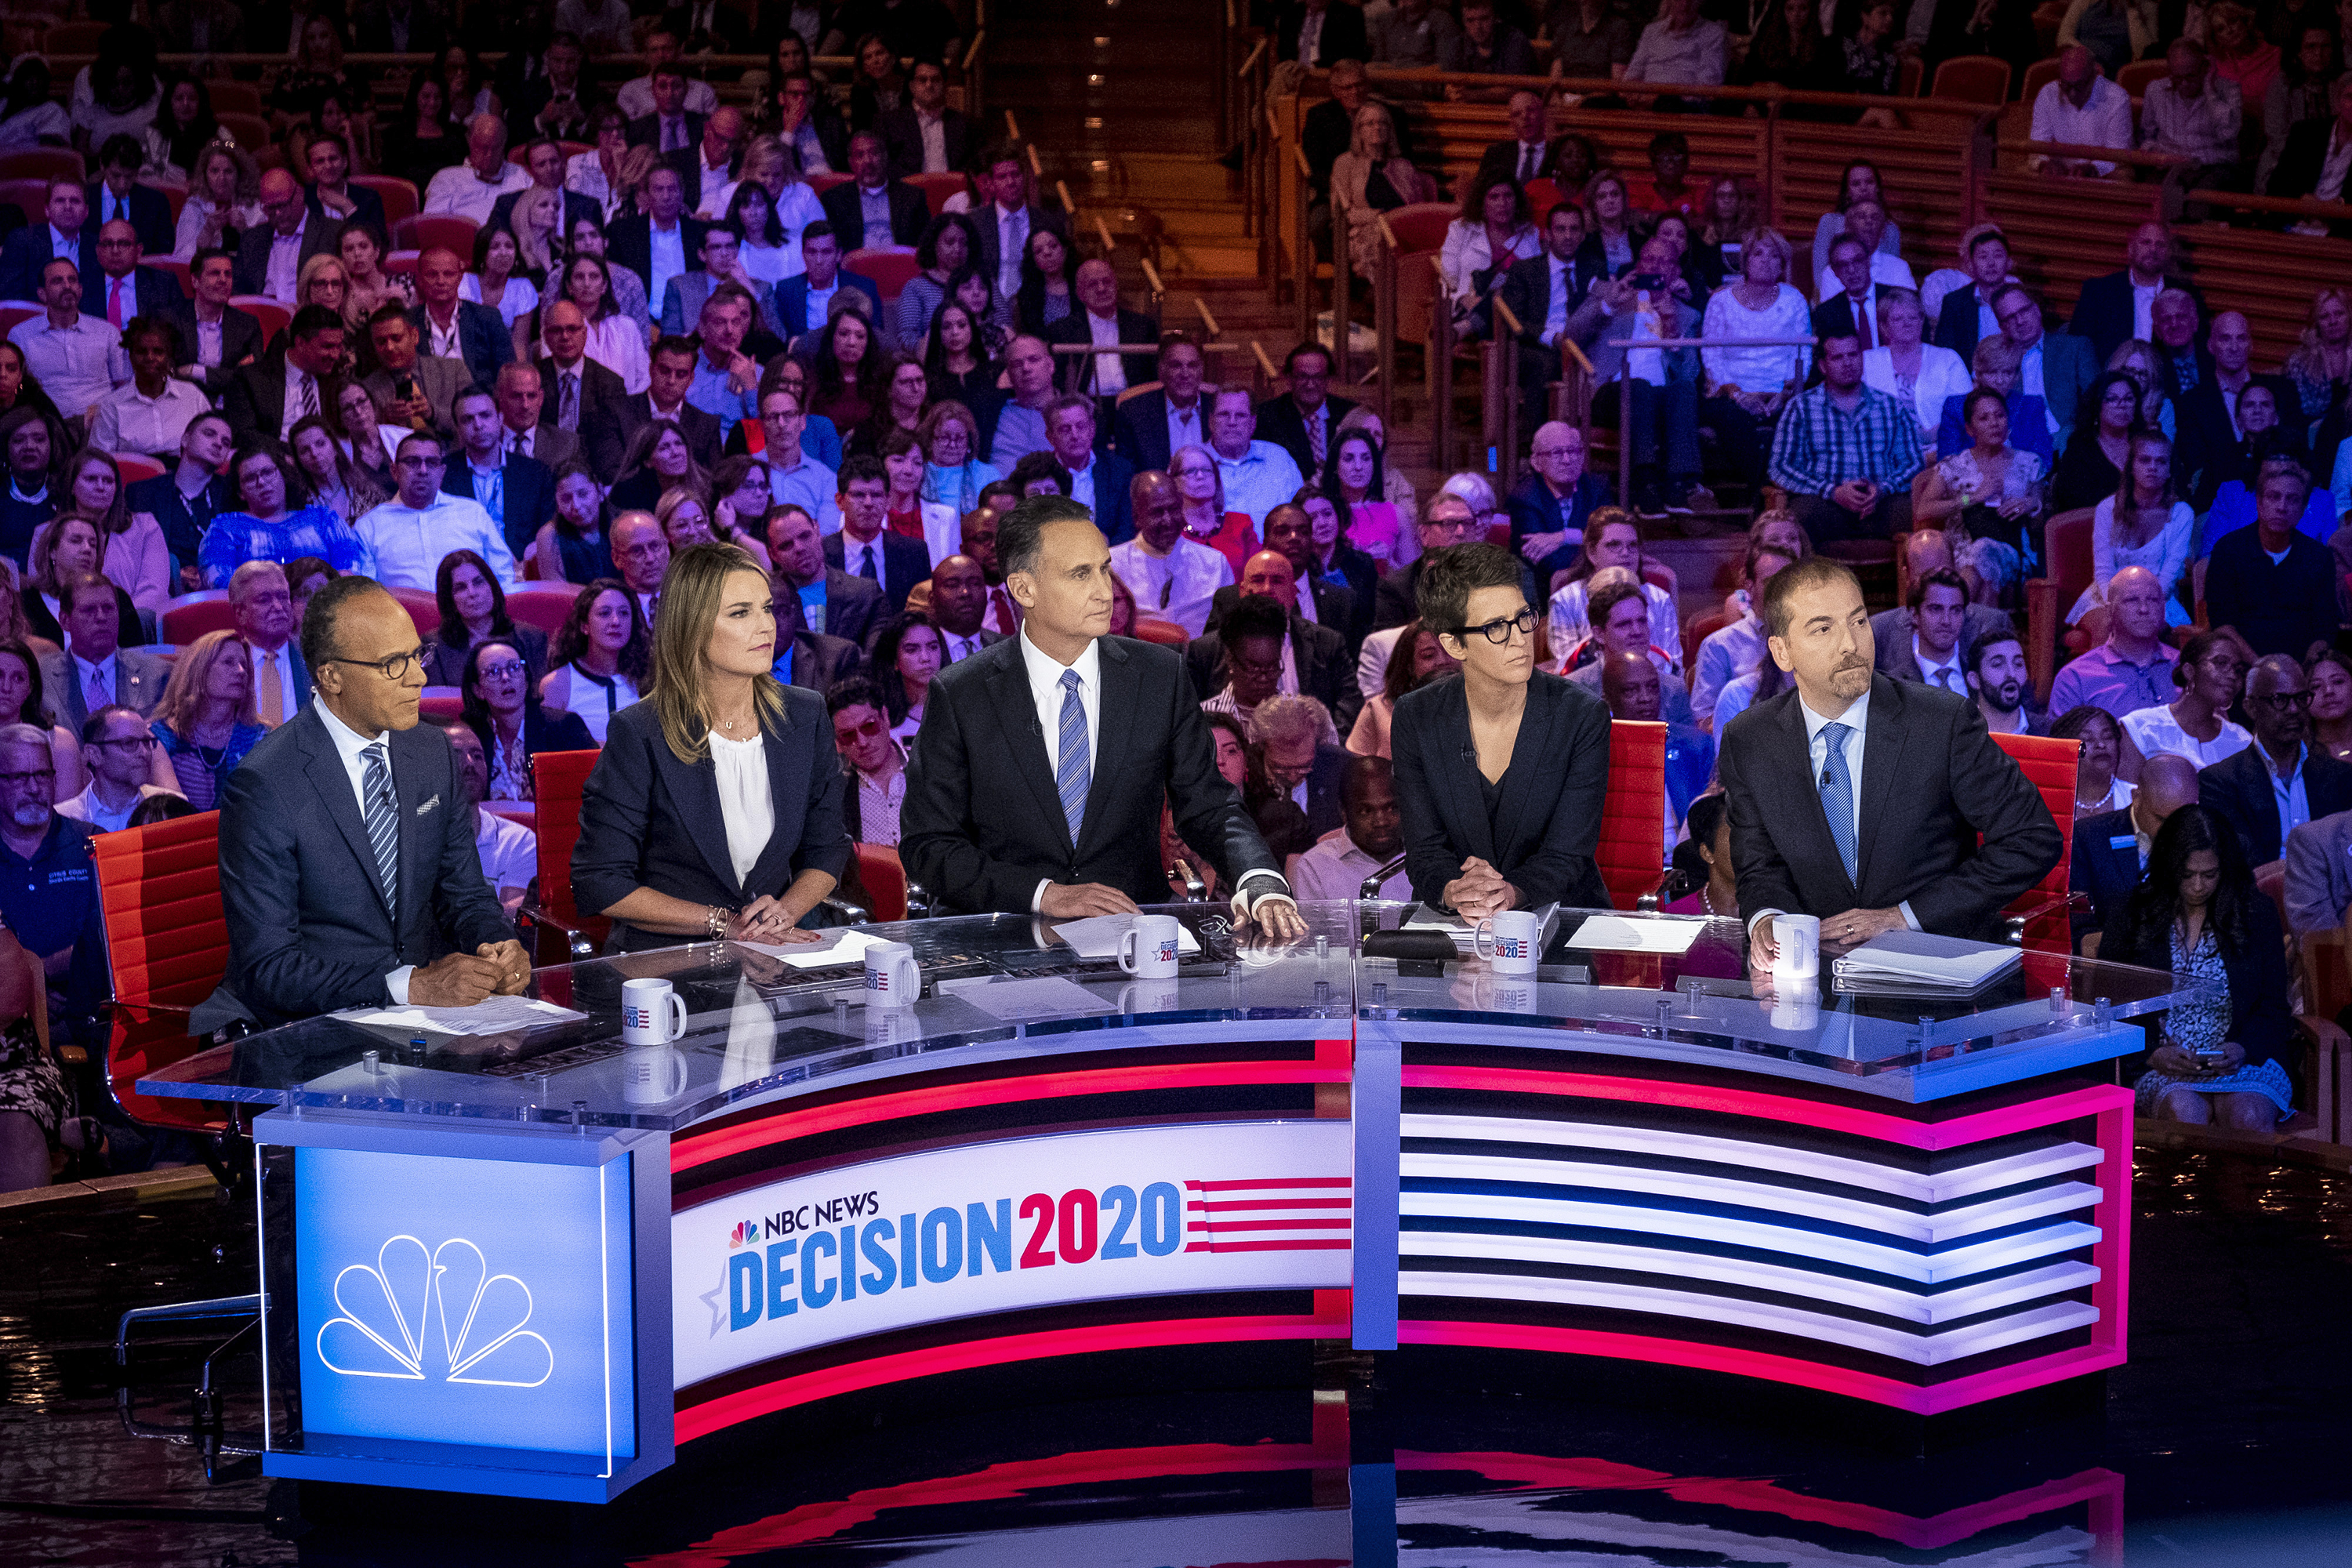 Several hosts on the second night of the first Democratic debate of the 2020 Presidential election in Miami, FLorida, on Thursday June 27, 2019. | Source: Getty Images